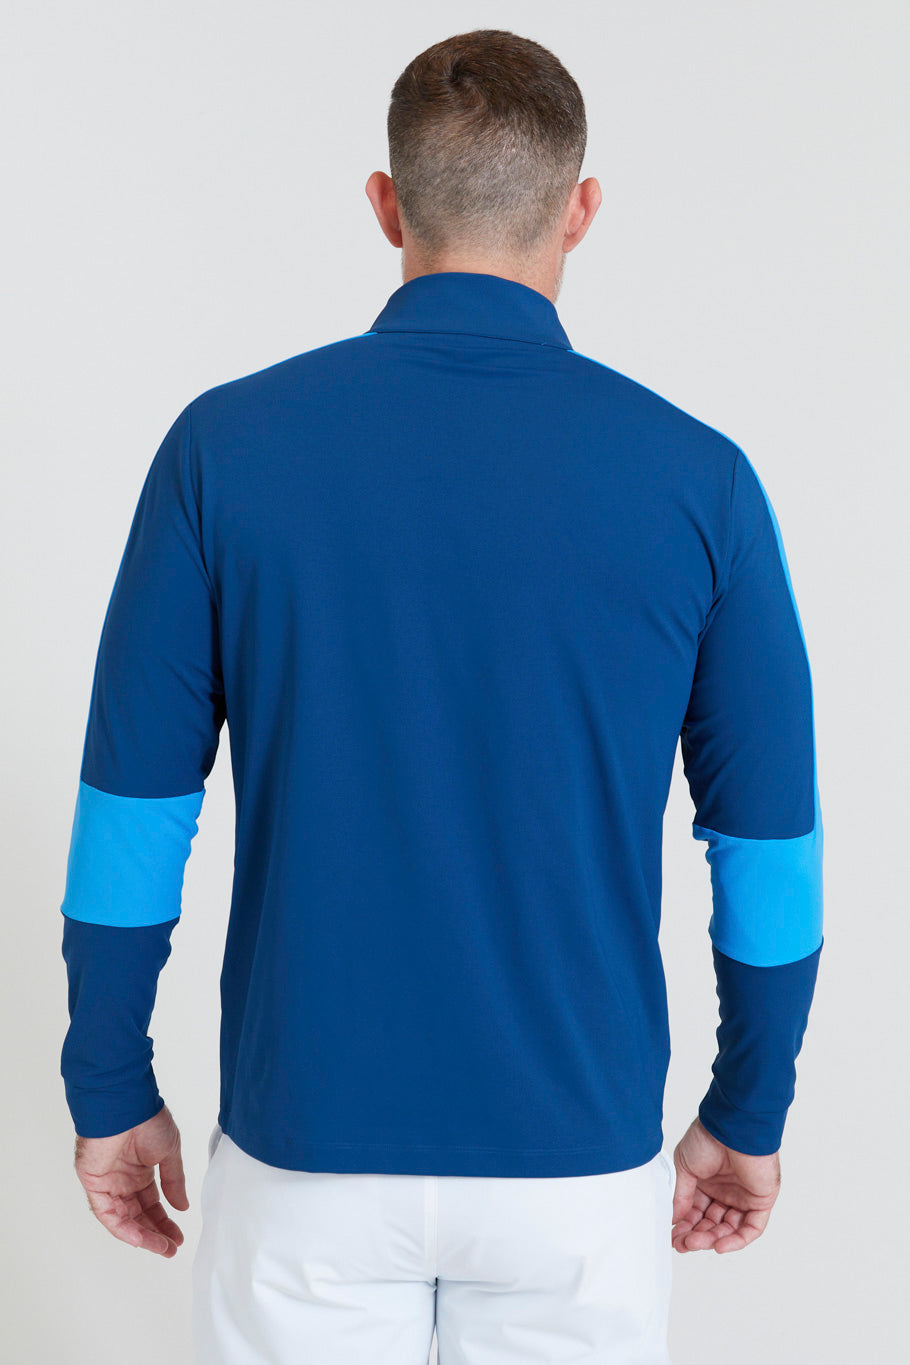 Image of the fowler quarter zip in admiral